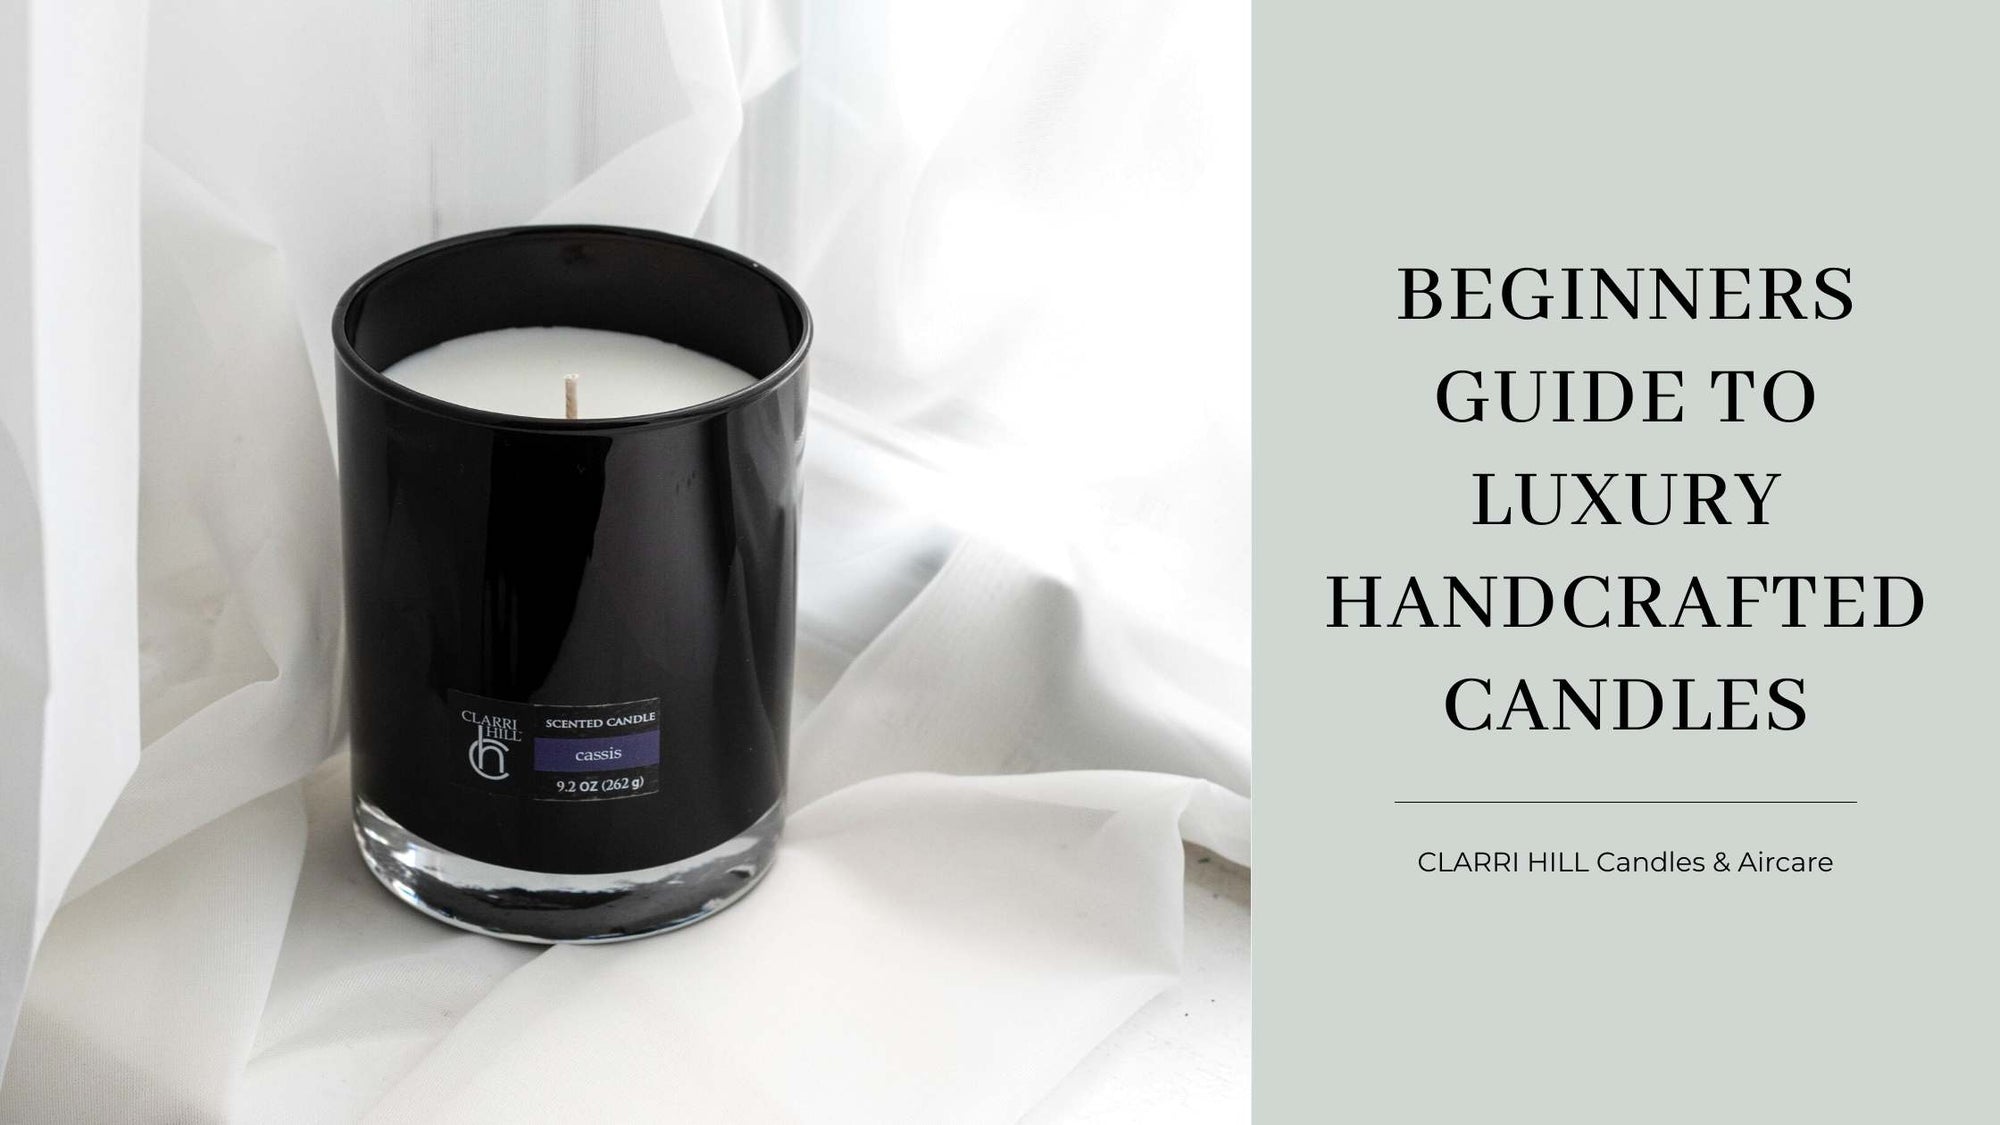 Beginners Guide to Luxury Handcrafted Candles | Clarri Hill